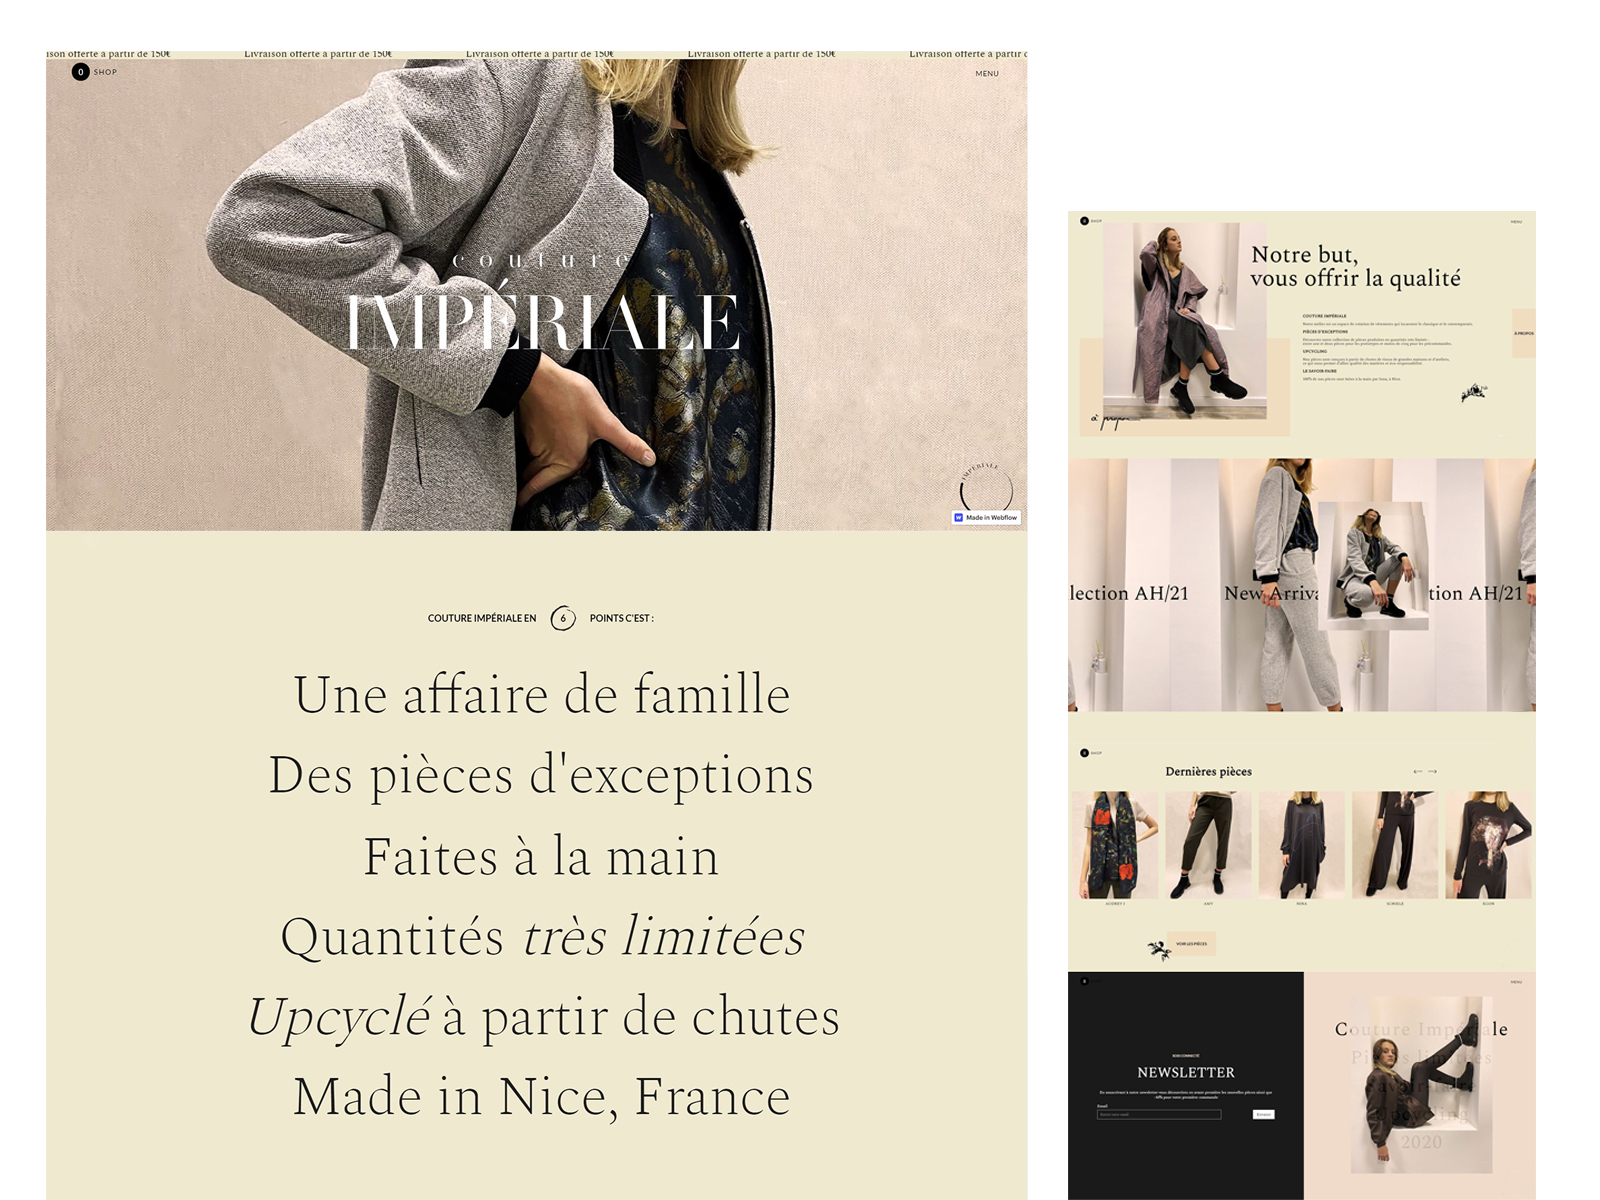 Couture Imperiale by Maxim Ric Iangaev on Dribbble